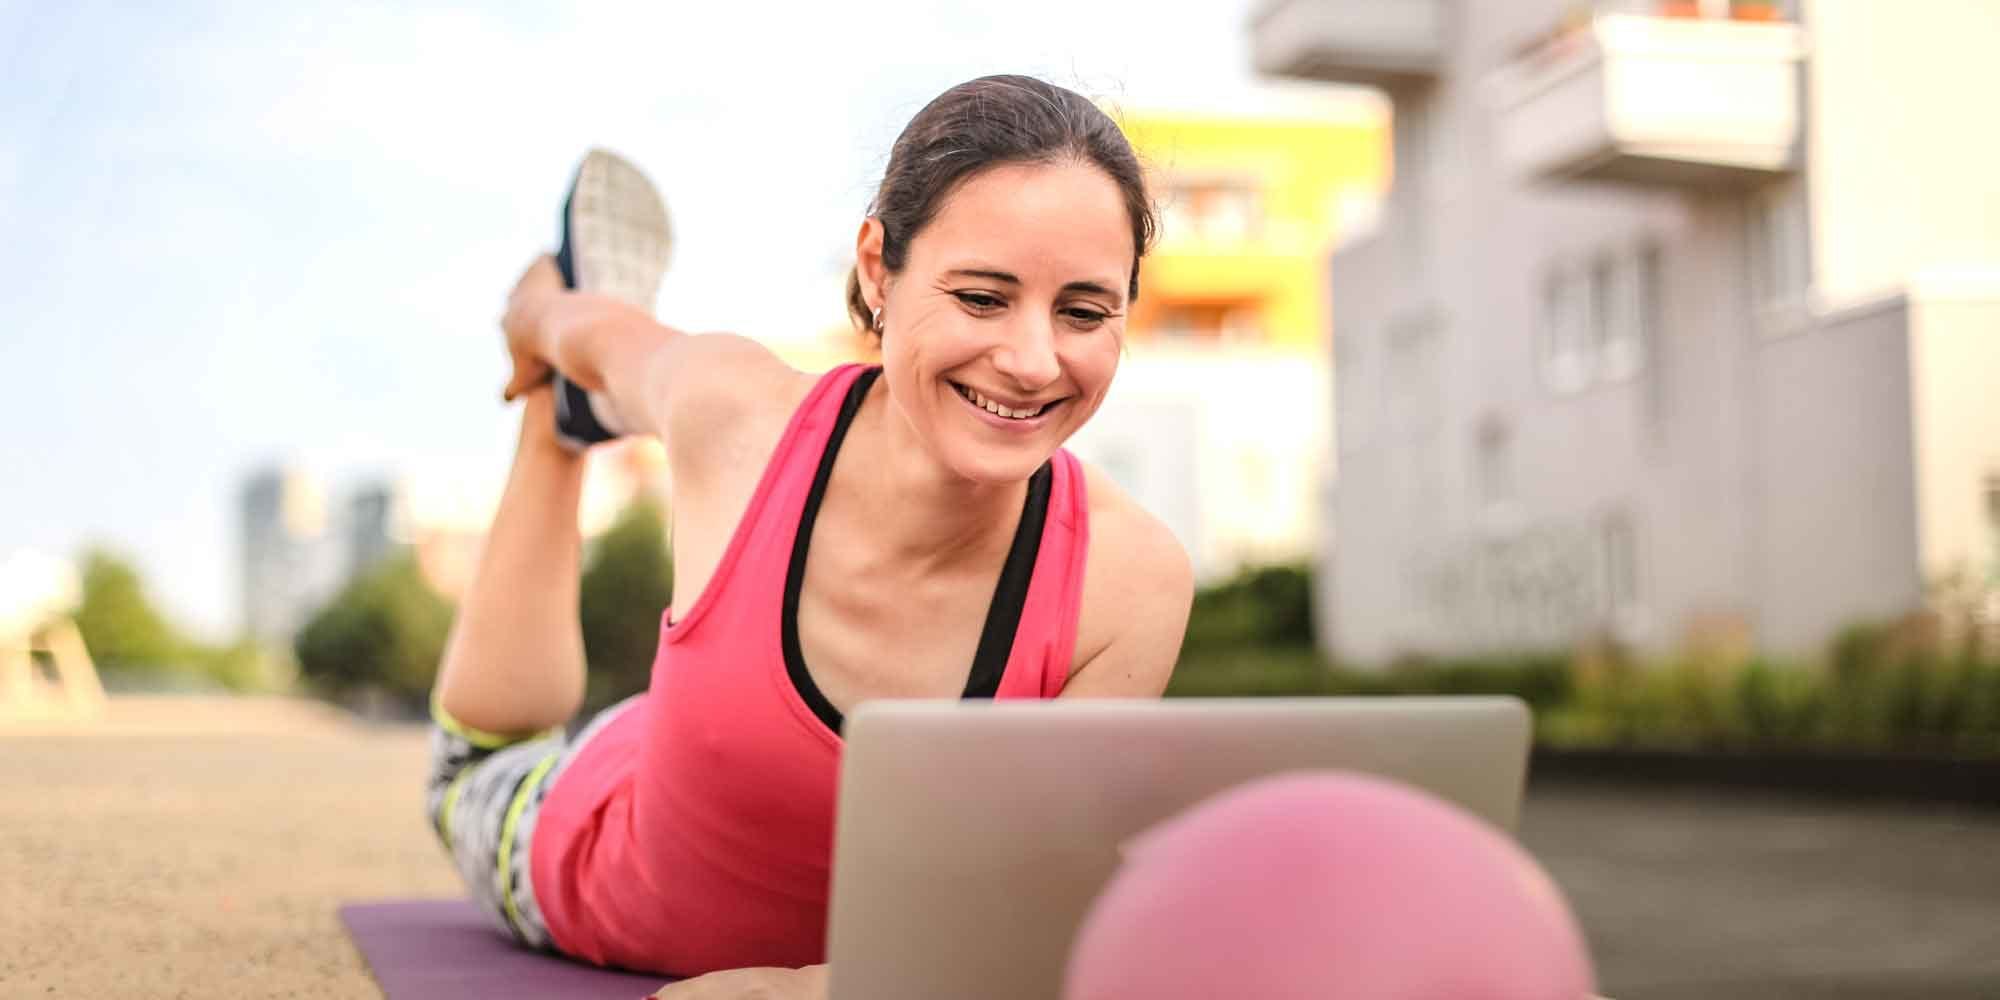 customer engagement illustrated by woman exercising to online video